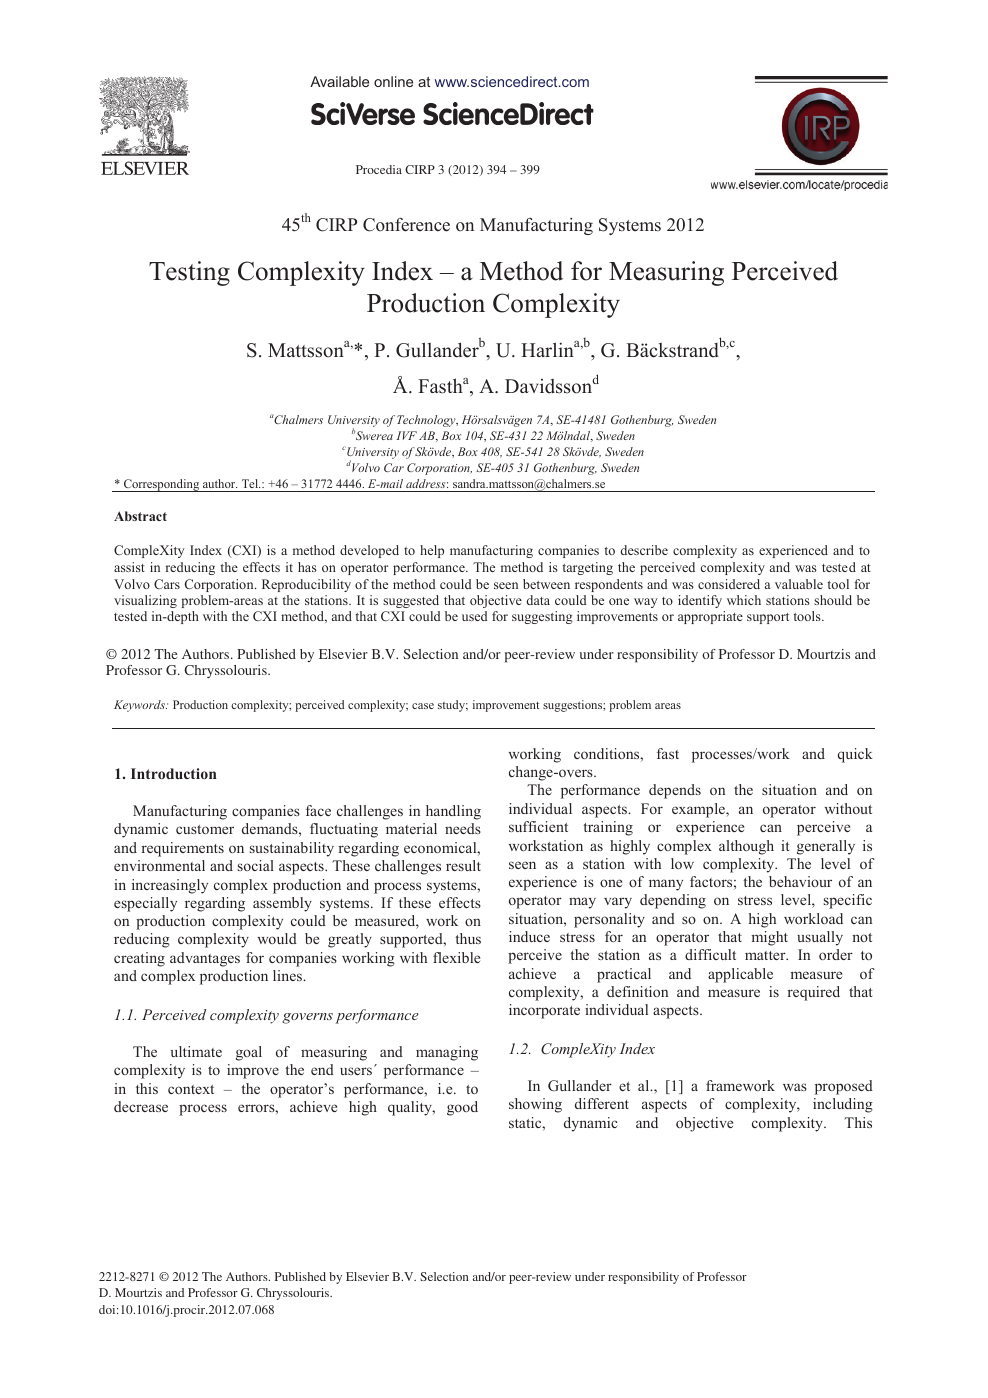 Testing Complexity Index A Method For Measuring Perceived Production Complexity Topic Of Research Paper In Economics And Business Download Scholarly Article Pdf And Read For Free On Cyberleninka Open Science Hub